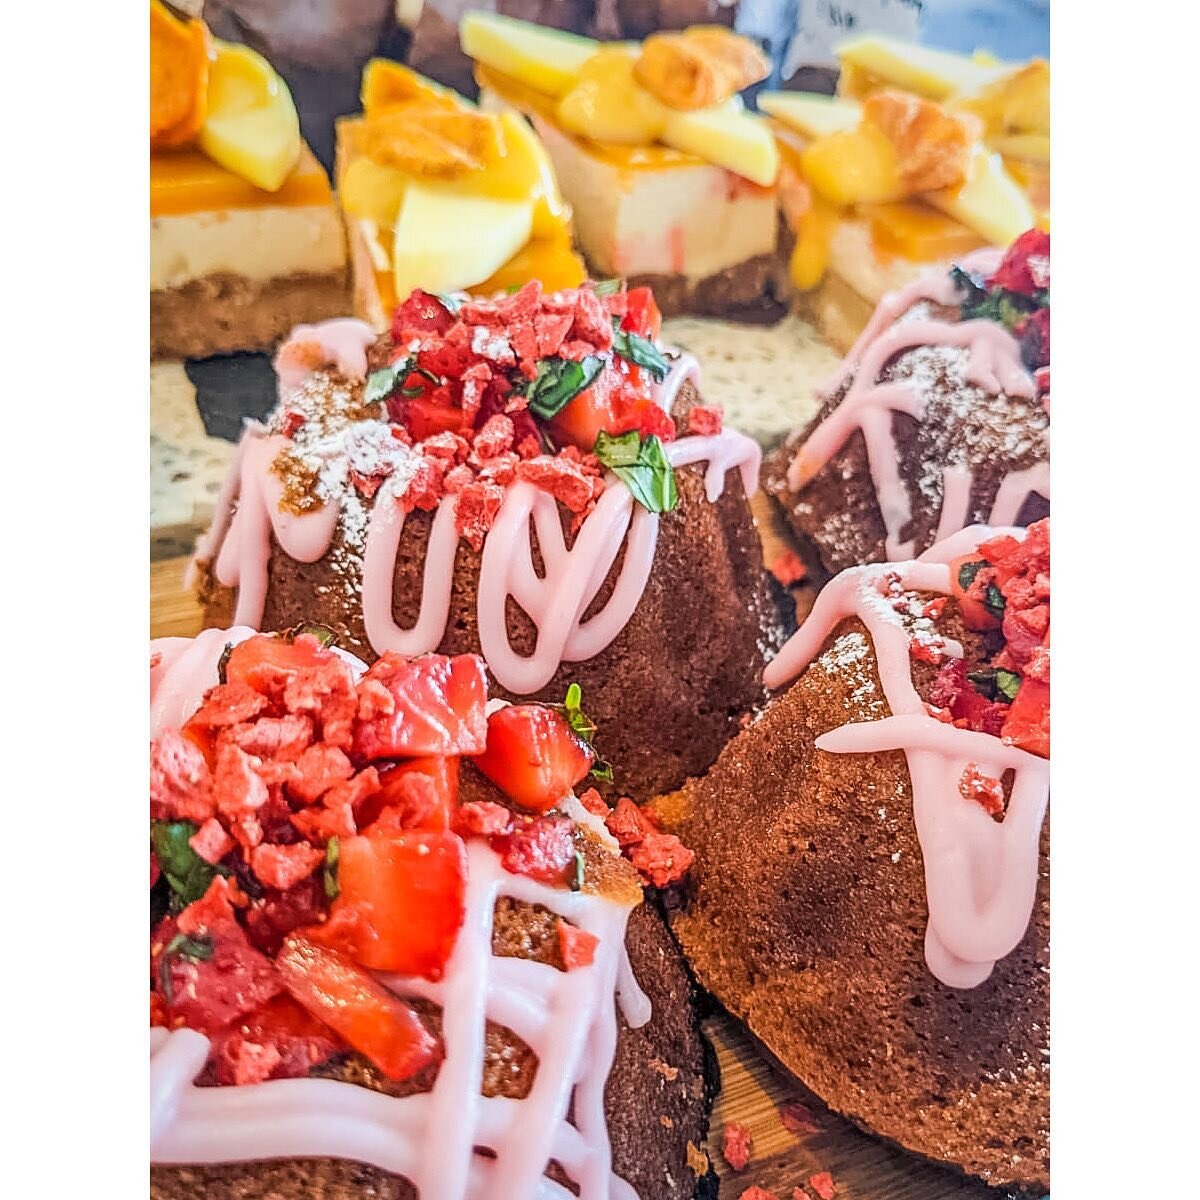 Forget the weather, sunshine is a state of mind with our Strawberry &amp; Basil Bundts and Mango, Passionfruit &amp; Papaya Cheesecake Shortbread 🌞🌻🍊🍋💛